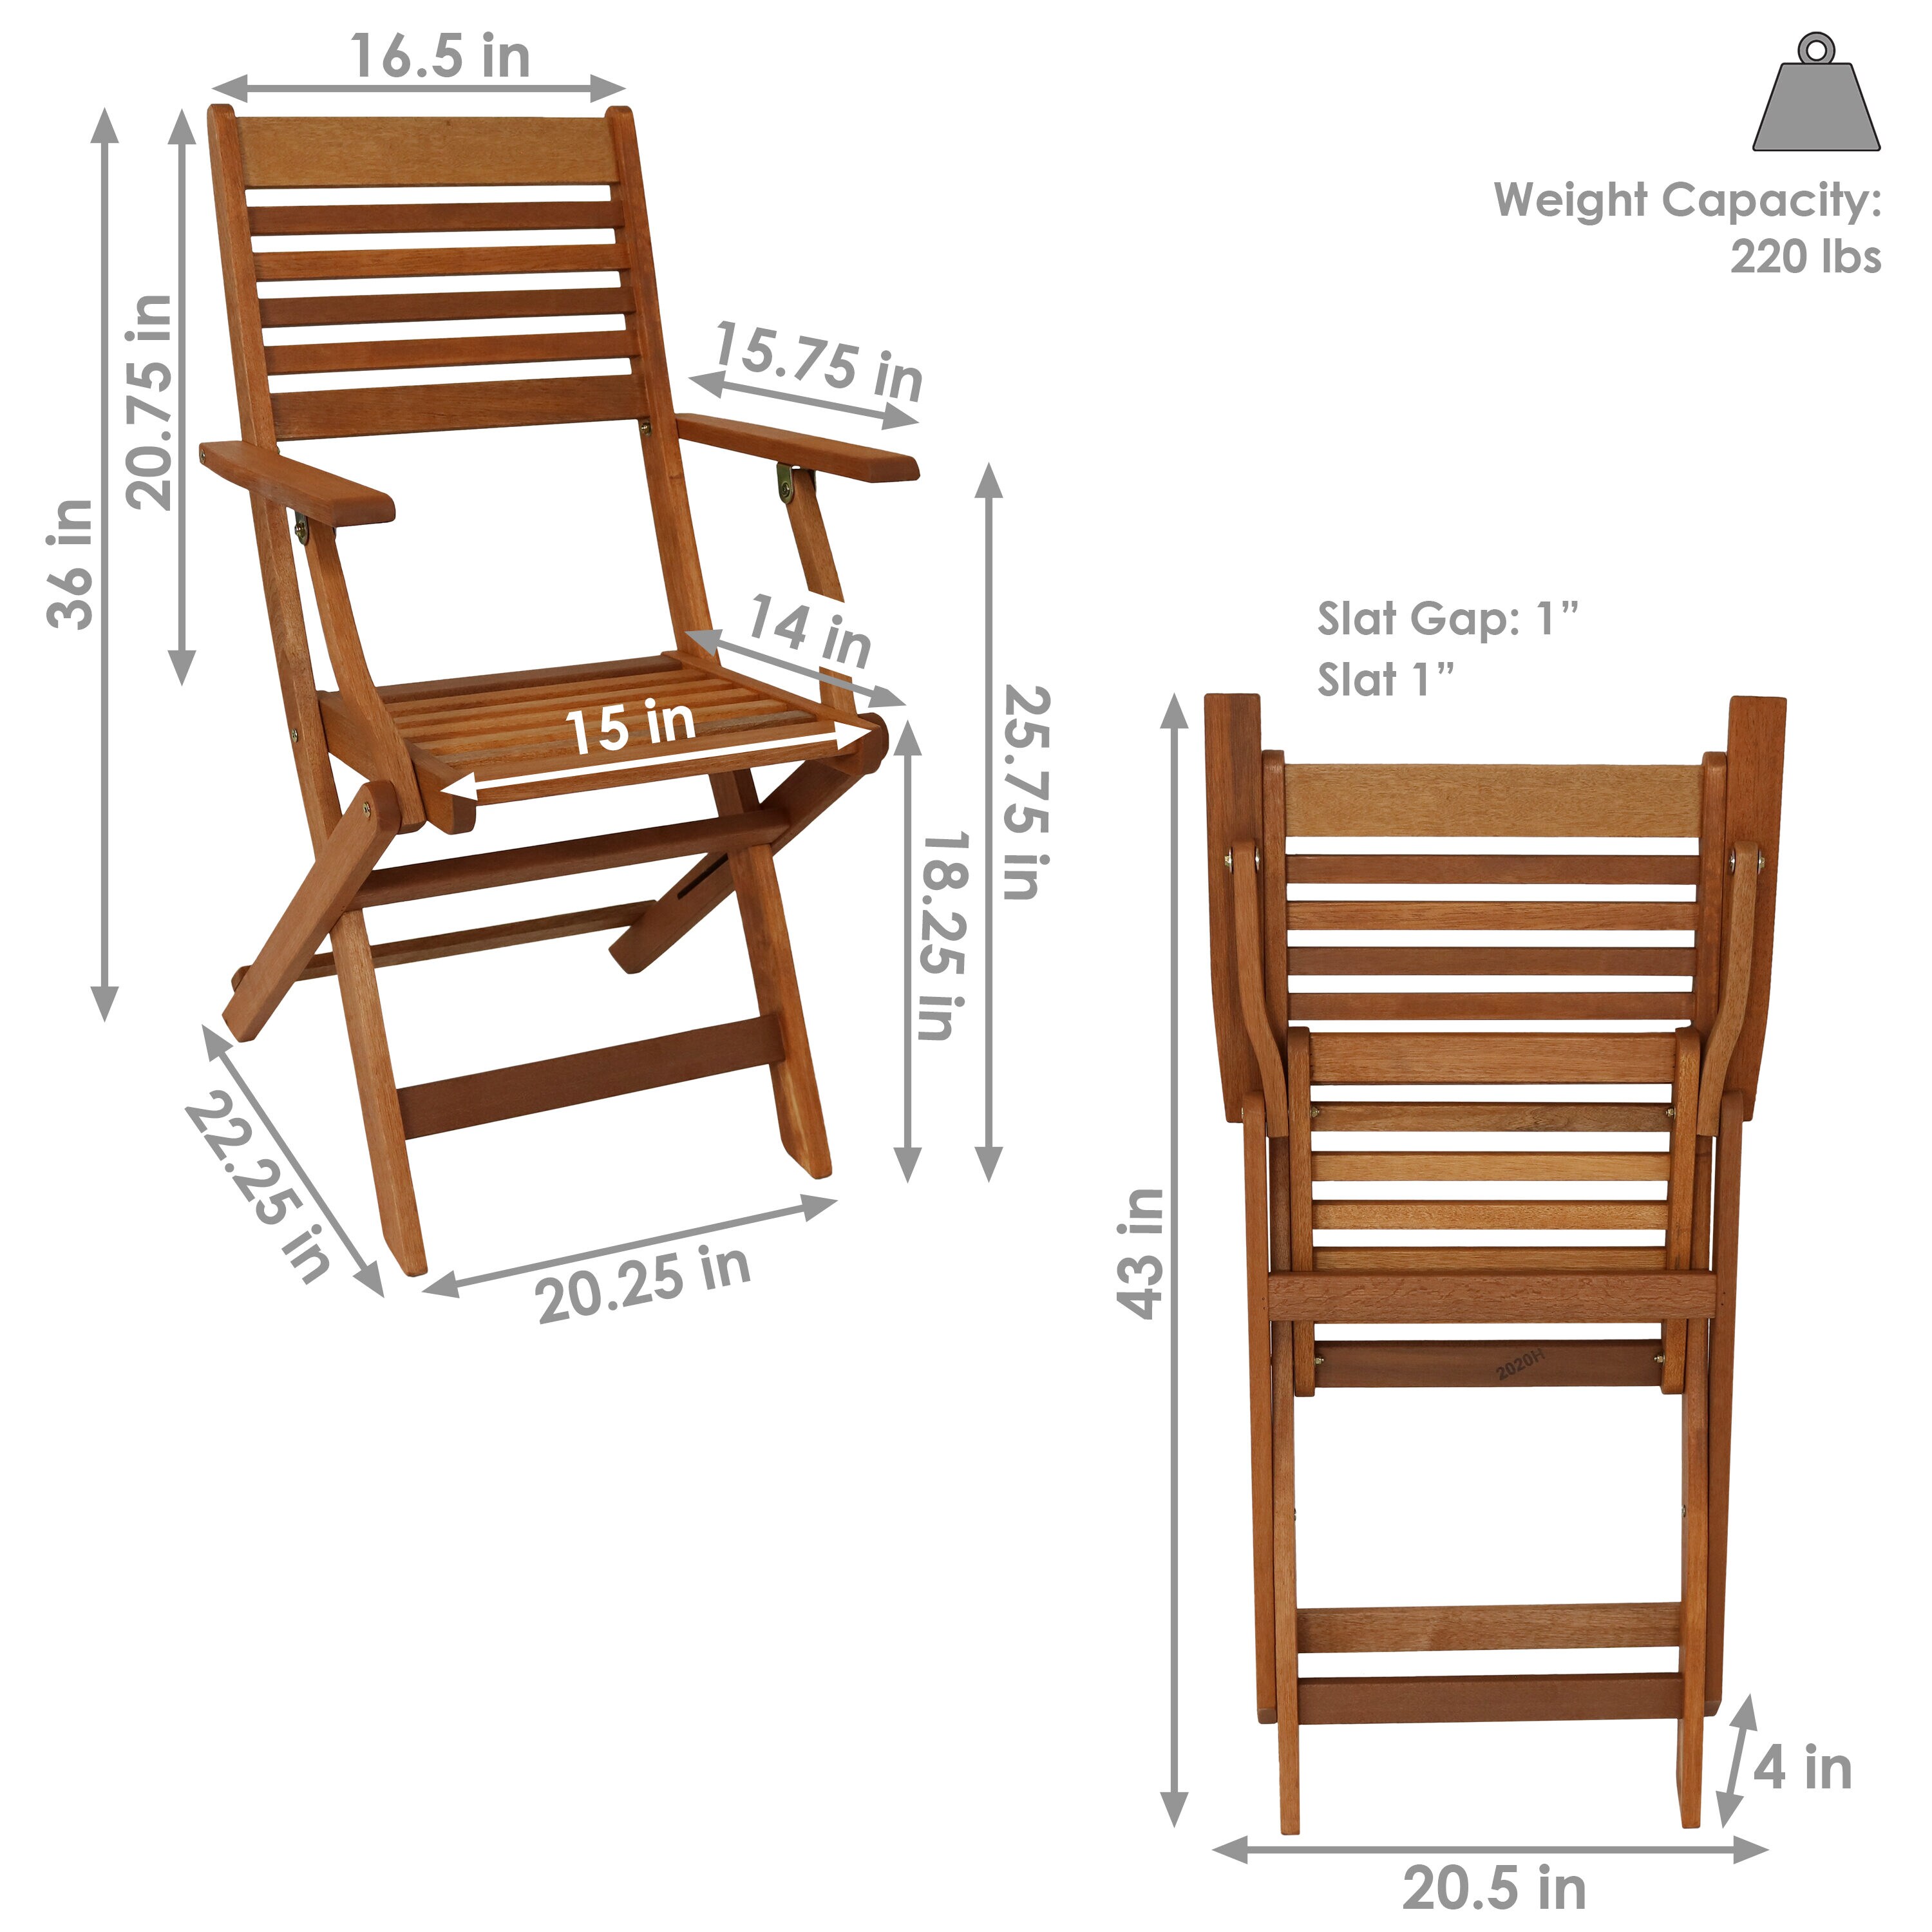 Sunnydaze Set of 2 Slat-Back Dining Chairs - Natural with Beige Cushions